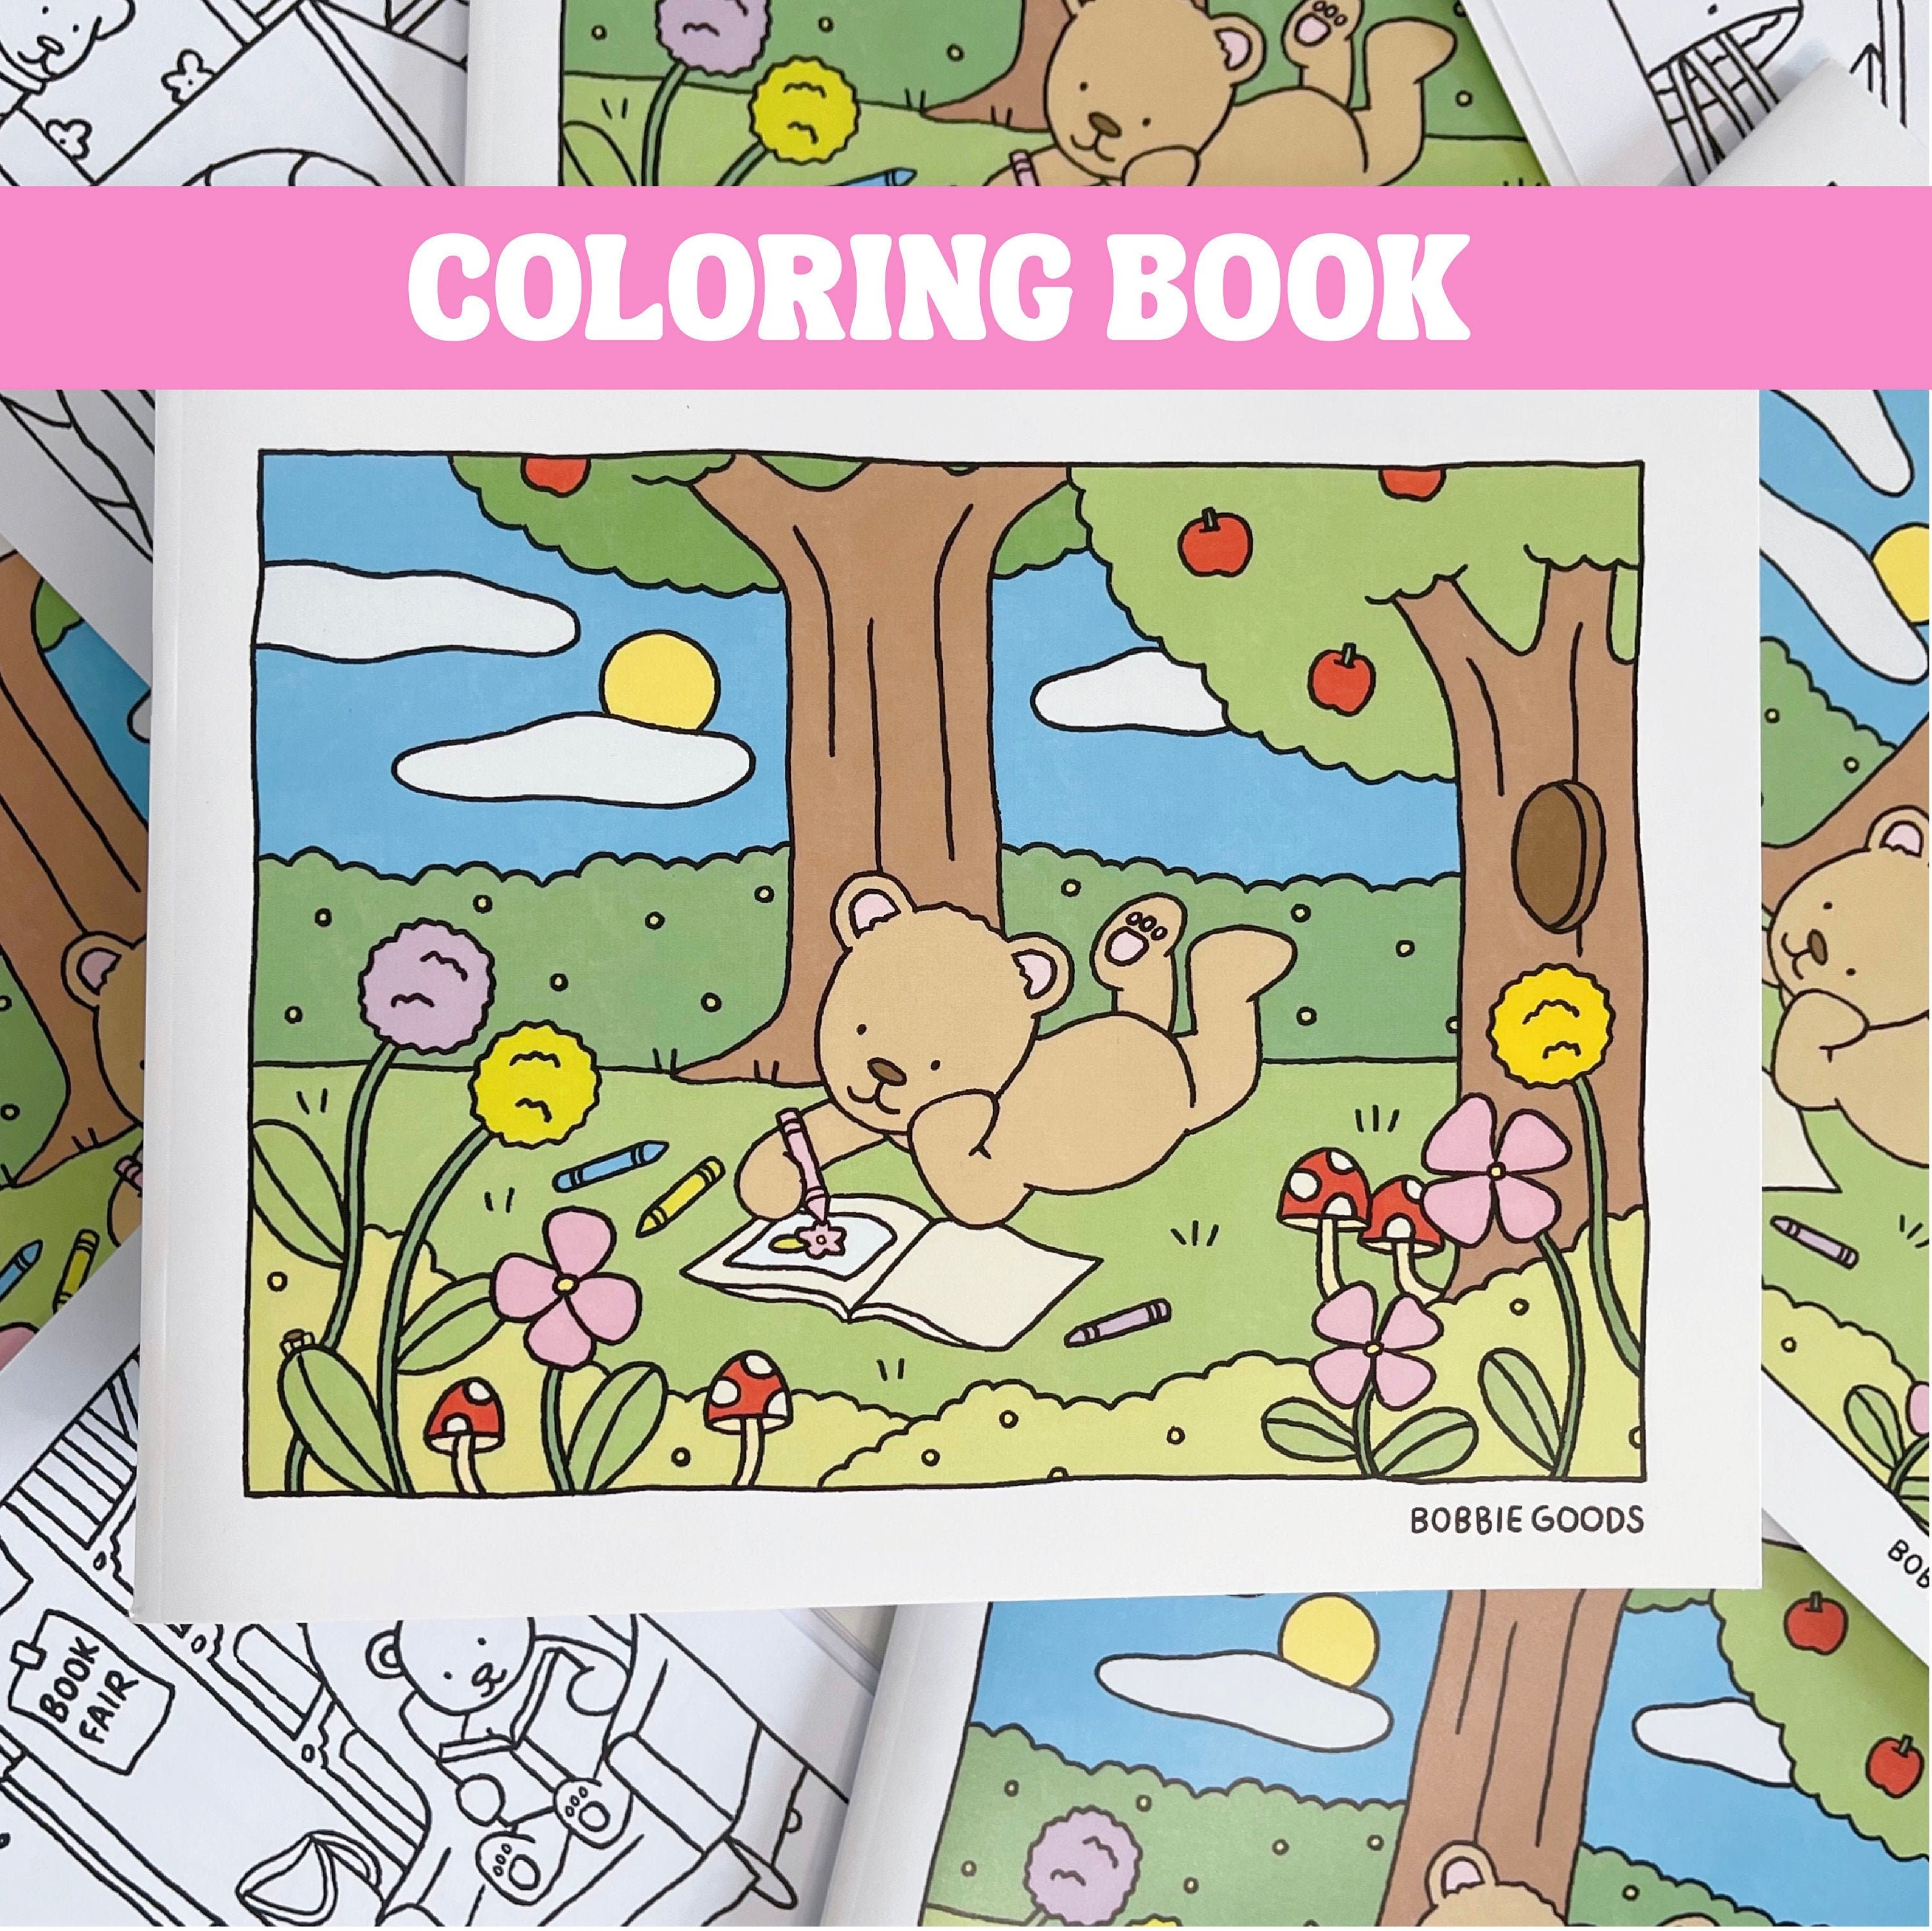 bobbie goods coloring book: Coloring Books With 50+ Coloring Pages